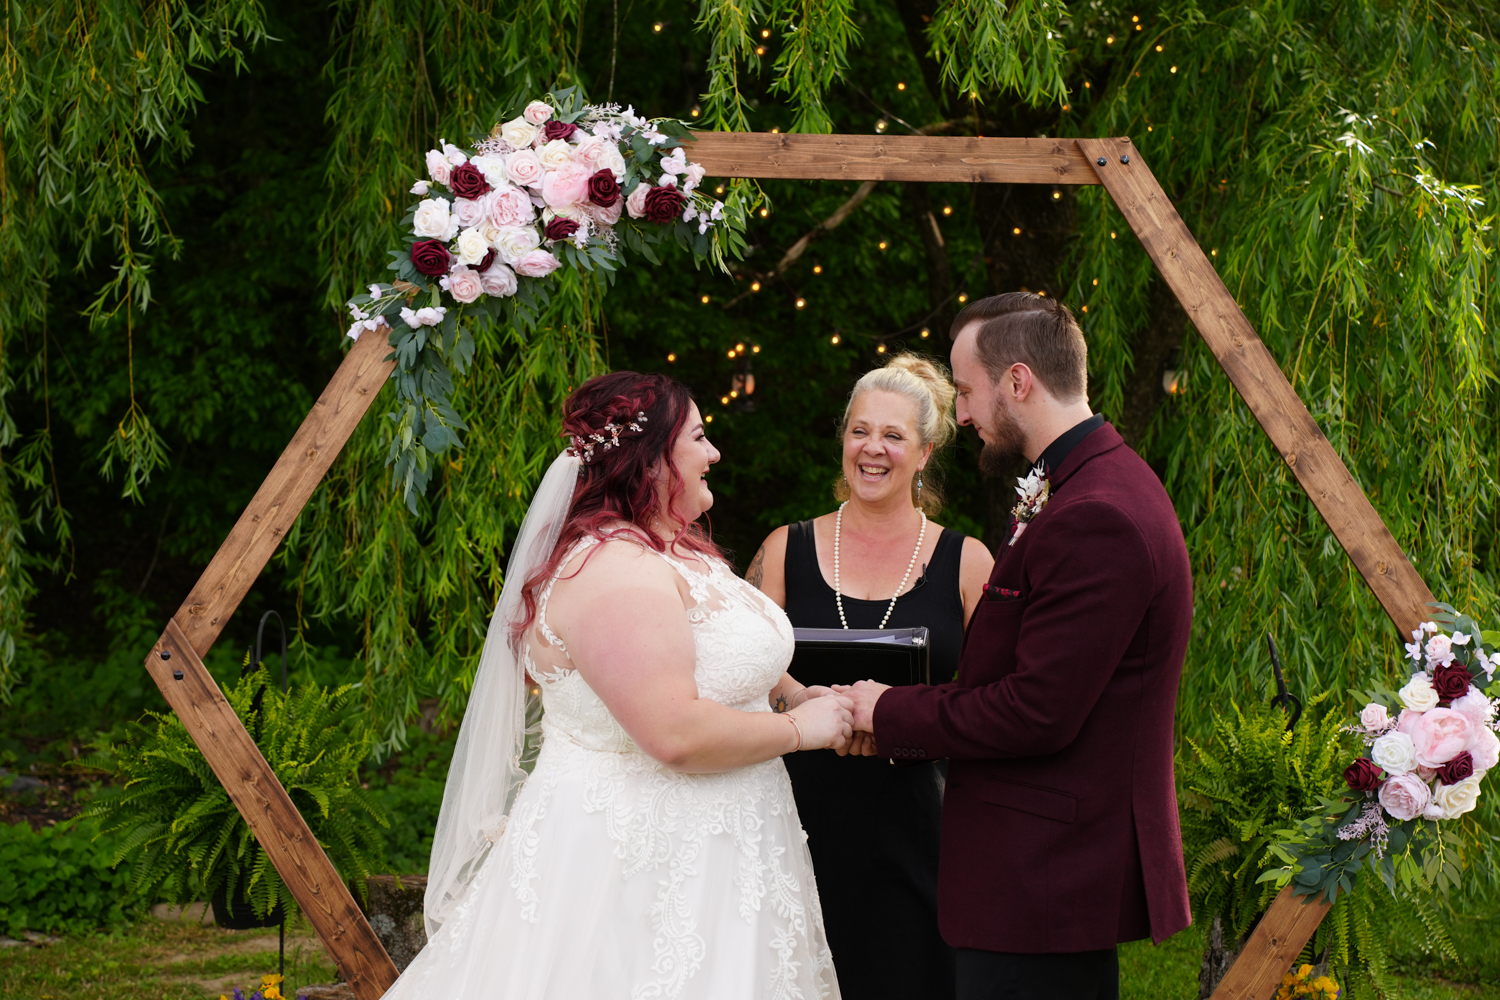 Woman ceremony officiant presiding over a wedding under a willow tree with a hexagon arbor